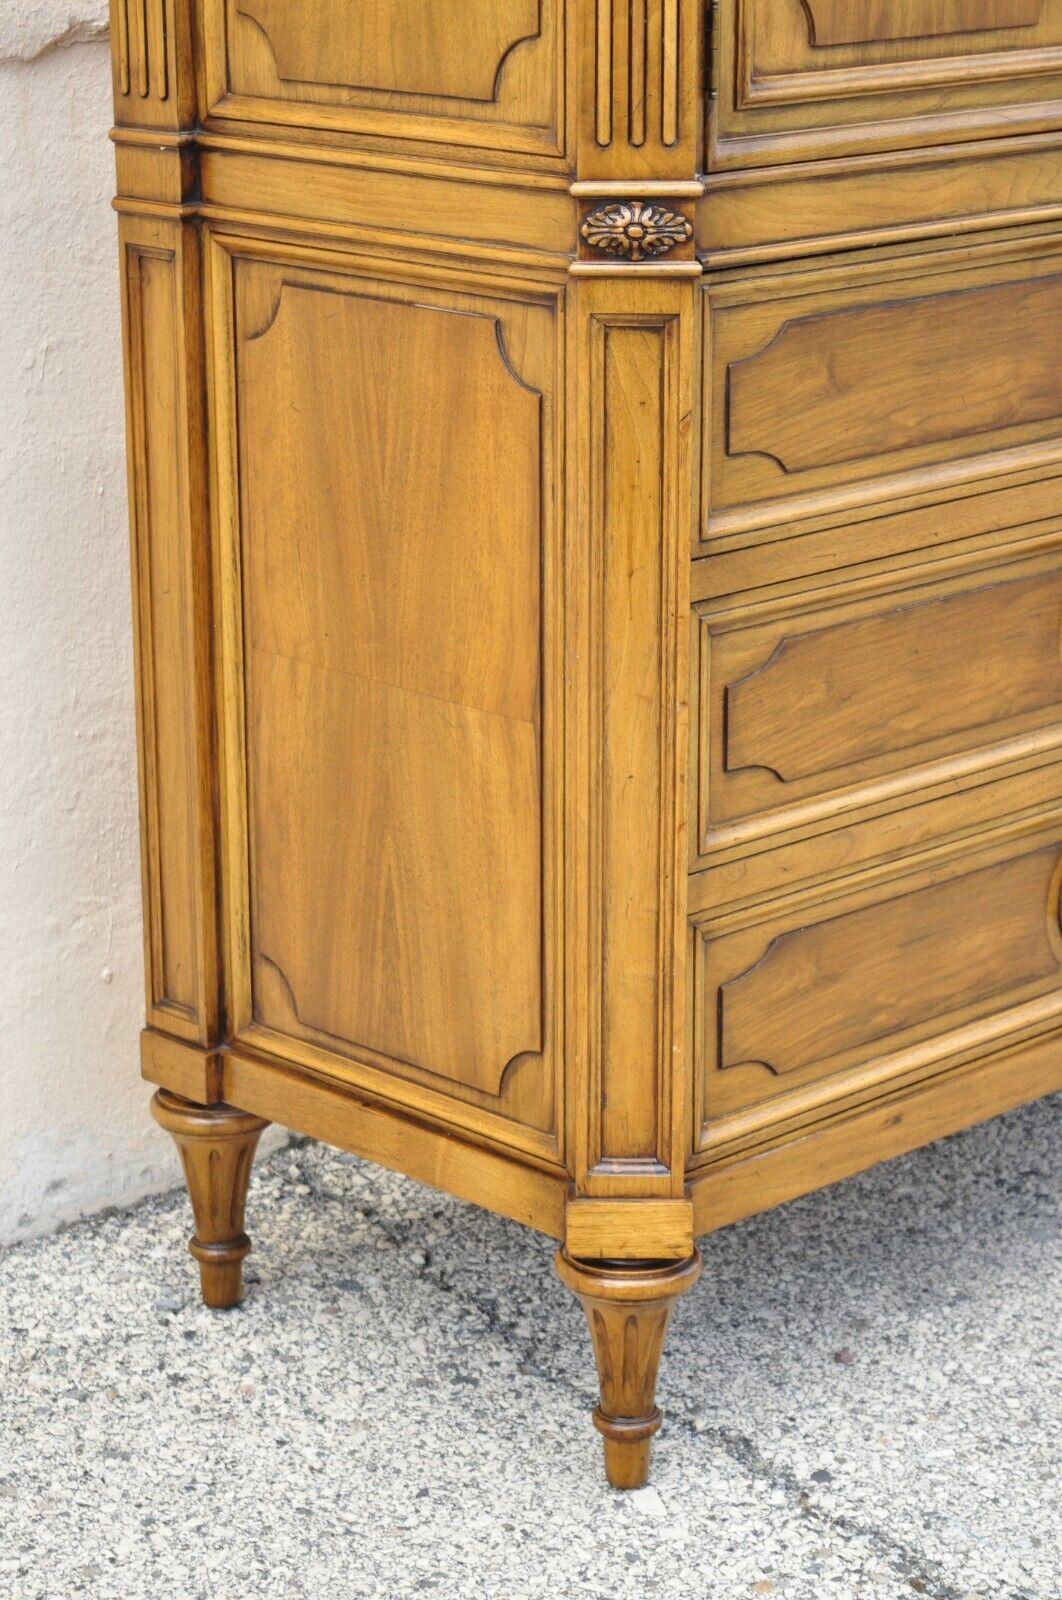 Karges French Regency Style Neoclassical Walnut Tall Chest Dresser Cabinet 1